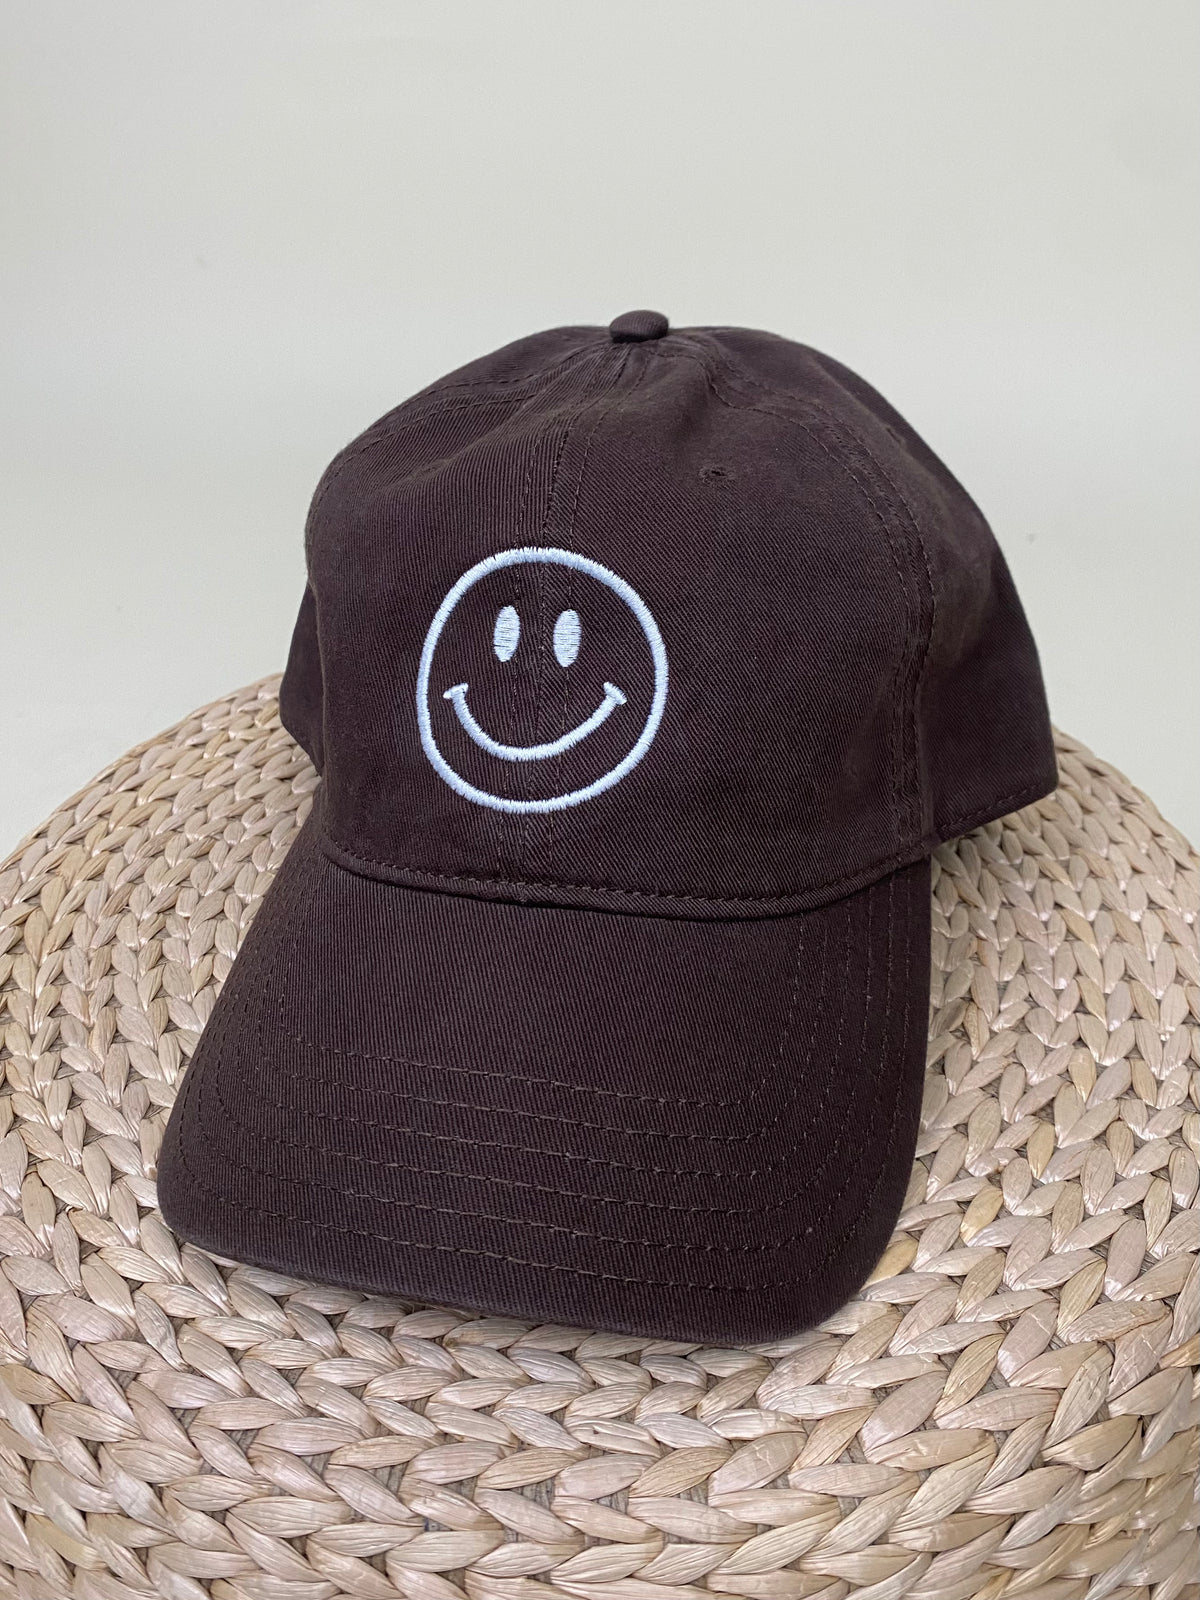 Smiley face baseball cap hat brown - Trendy Hats at Lush Fashion Lounge Boutique in Oklahoma City